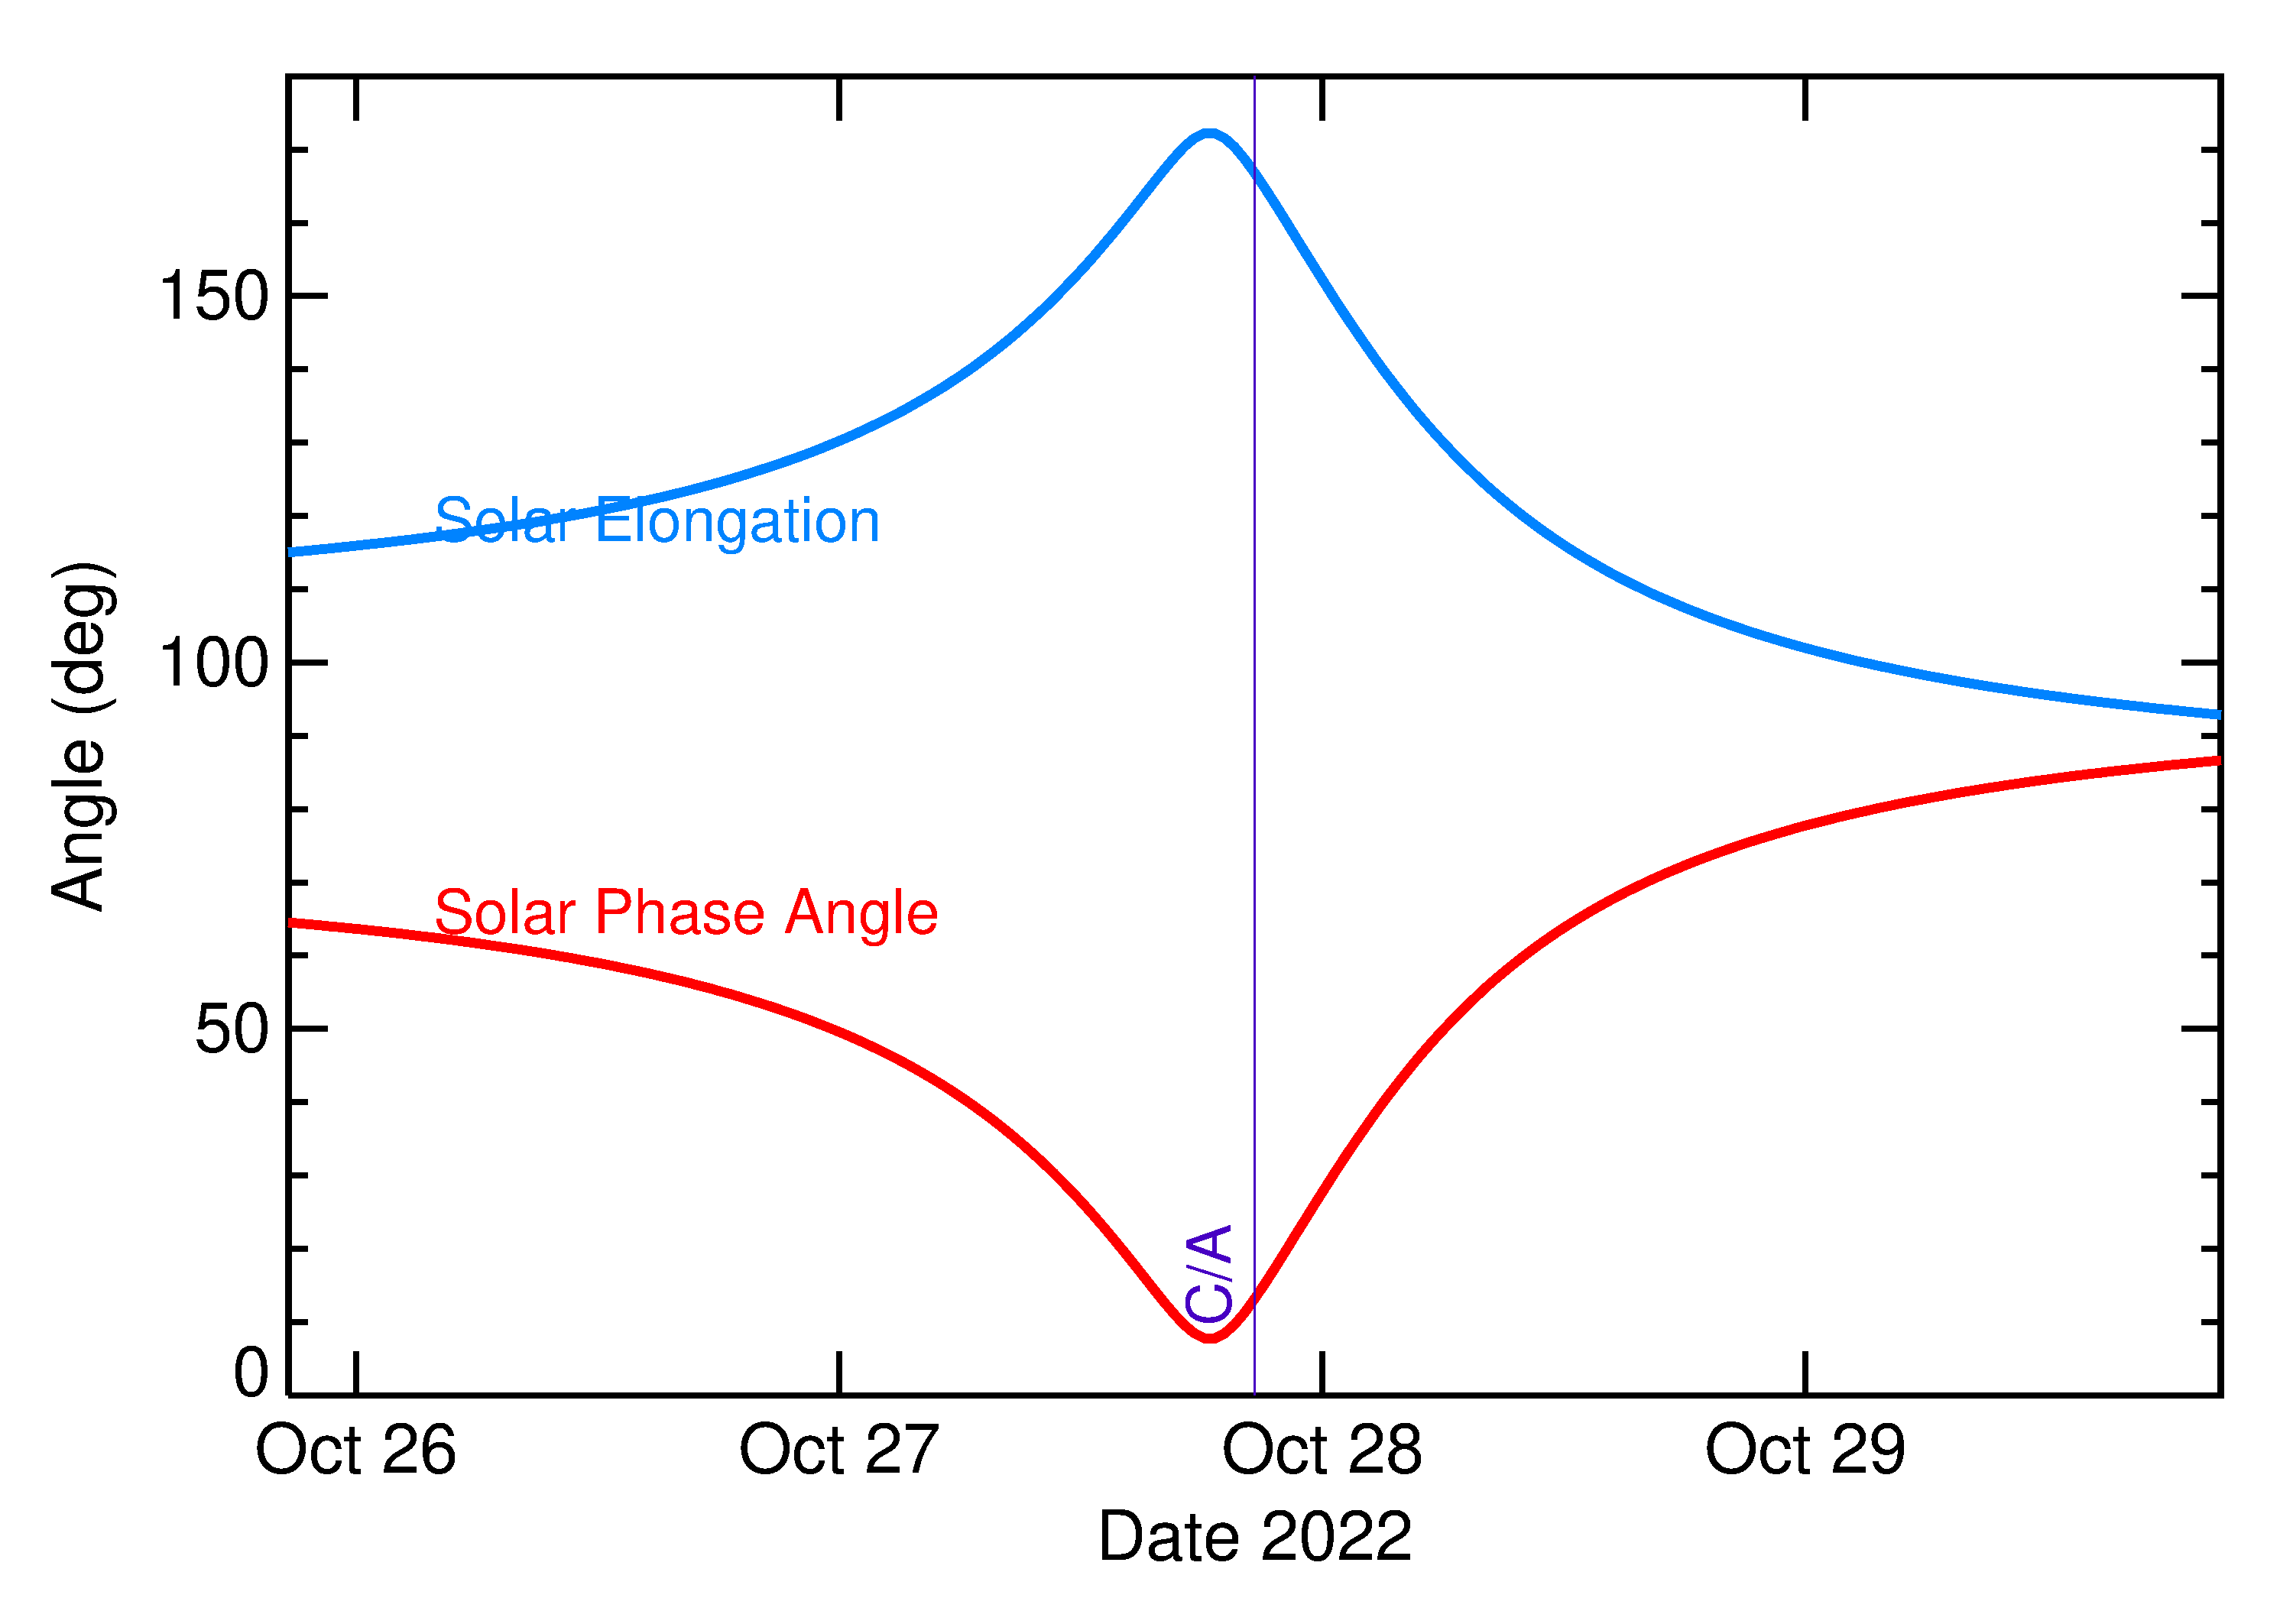 Solar Elongation and Solar Phase Angle of 2022 UB13 in the days around closest approach